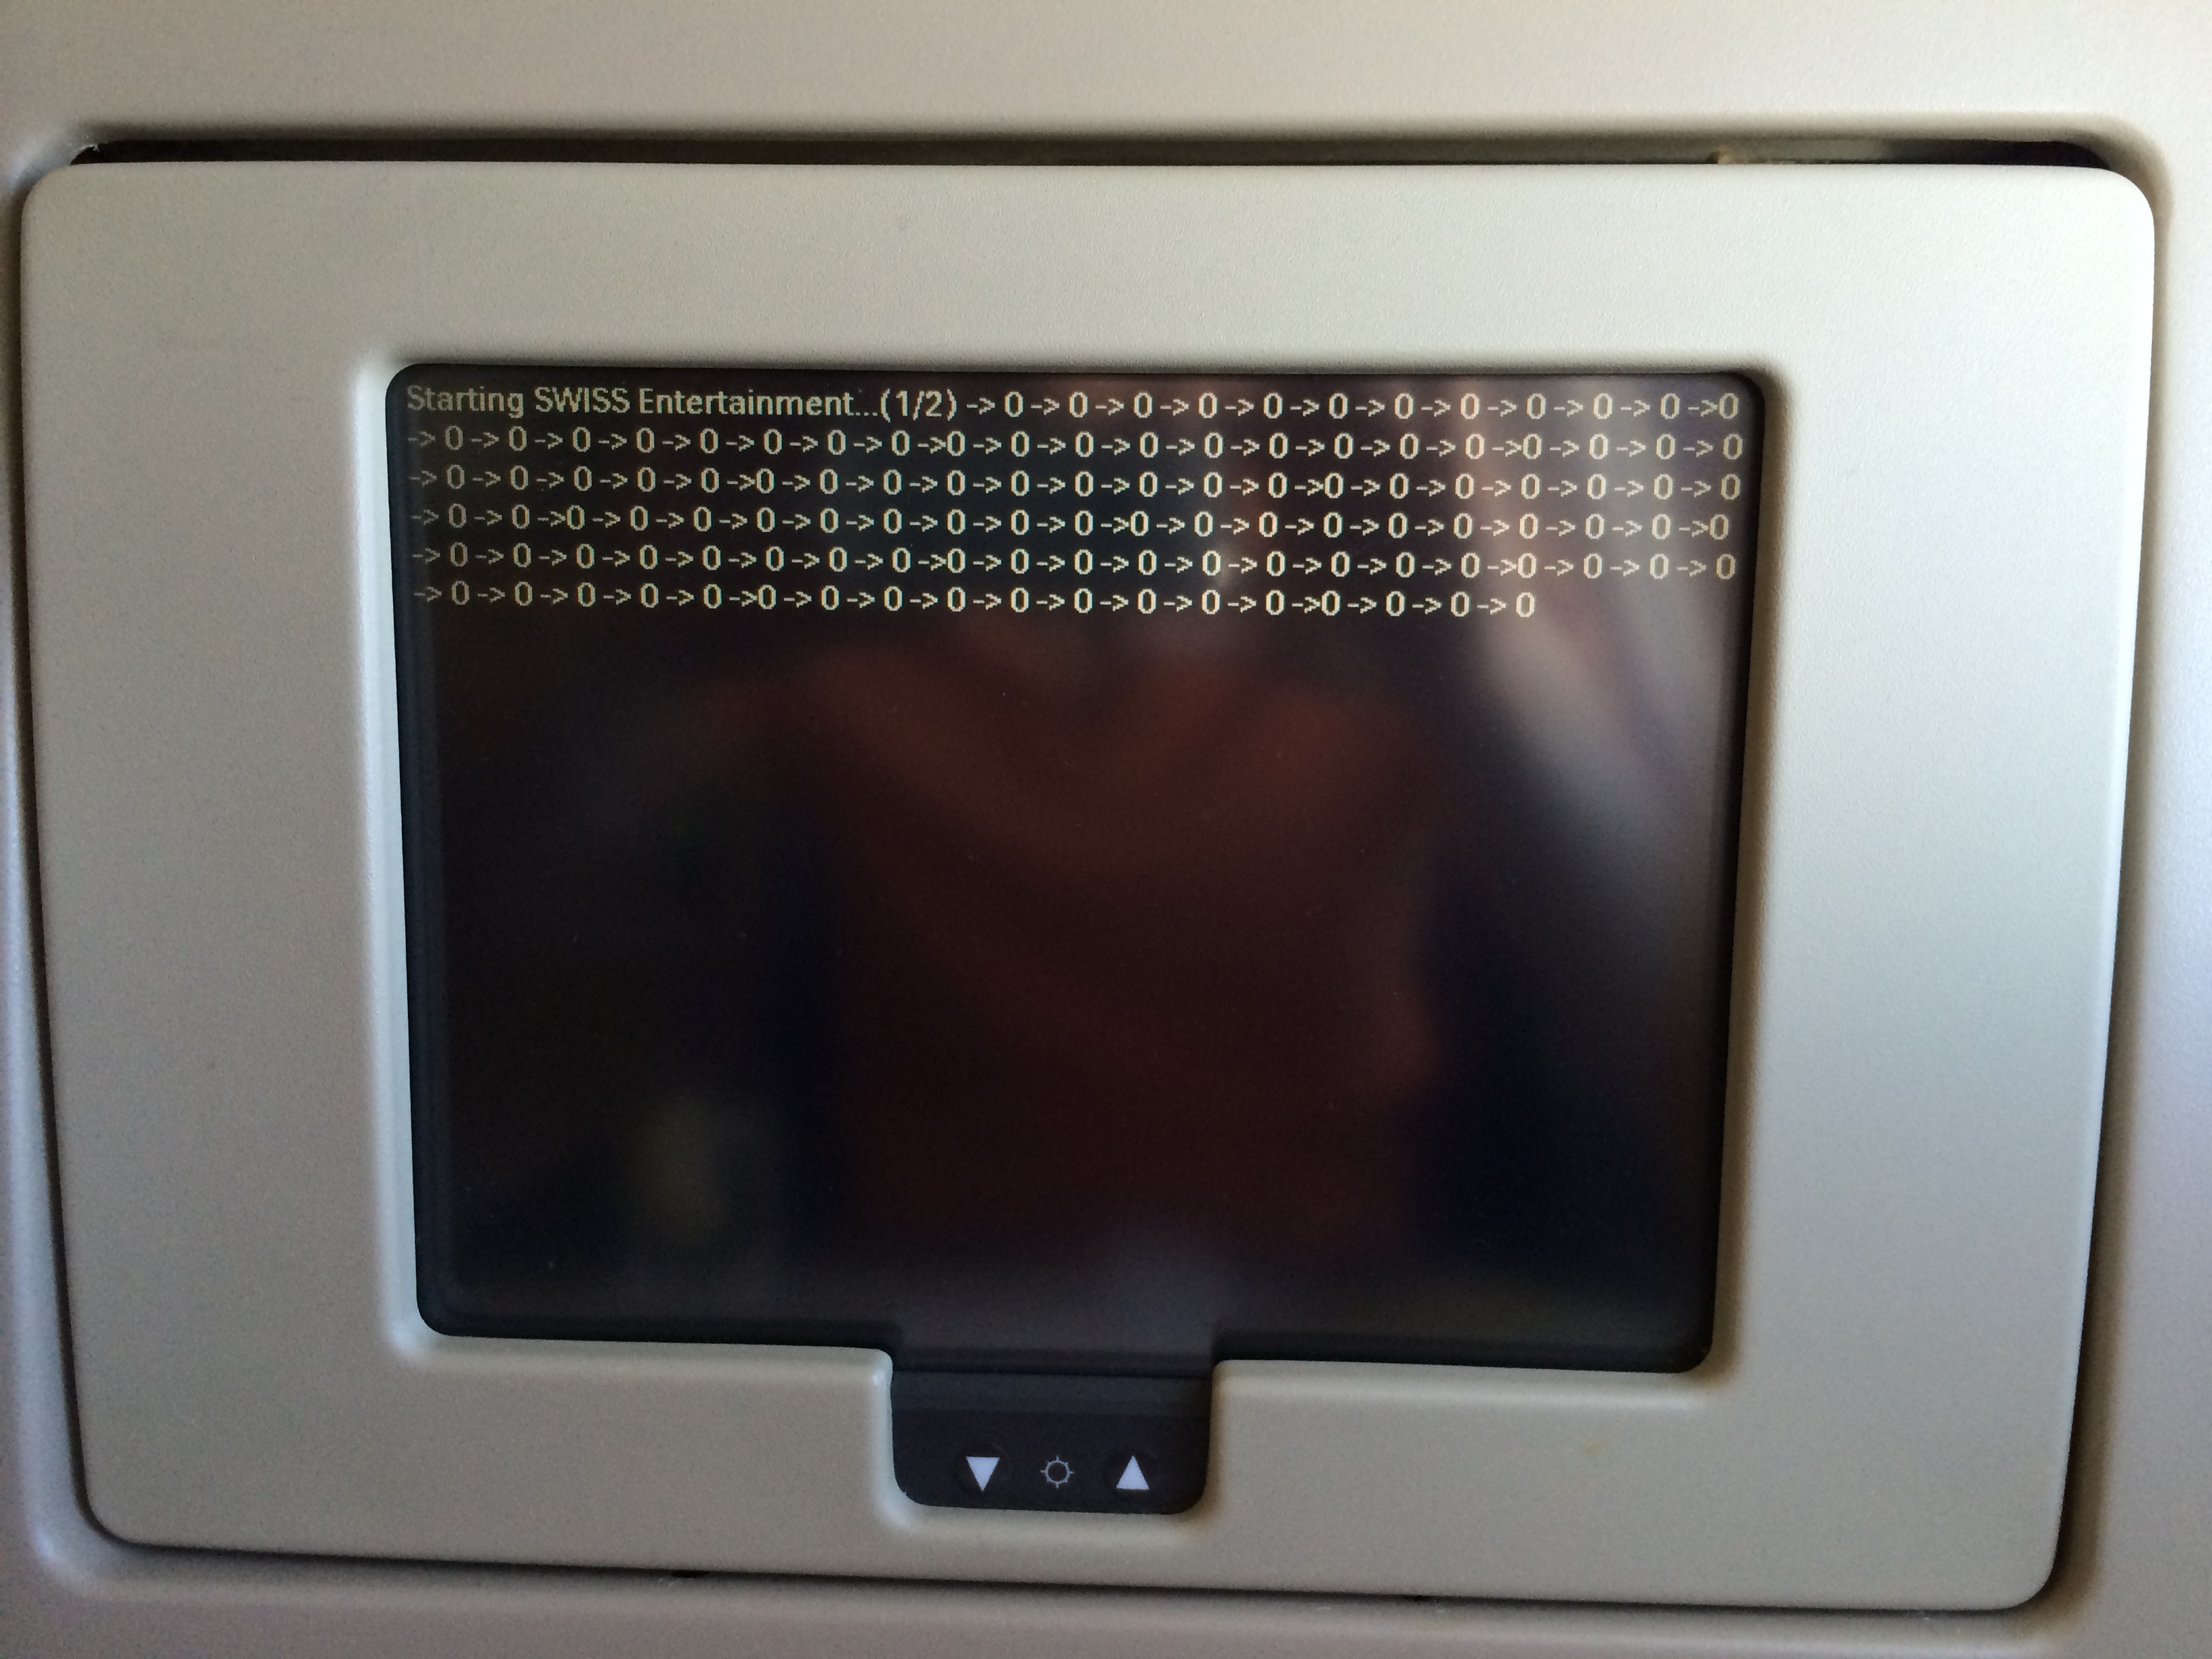 Lots of problems with the in-flight entertainment on this flight